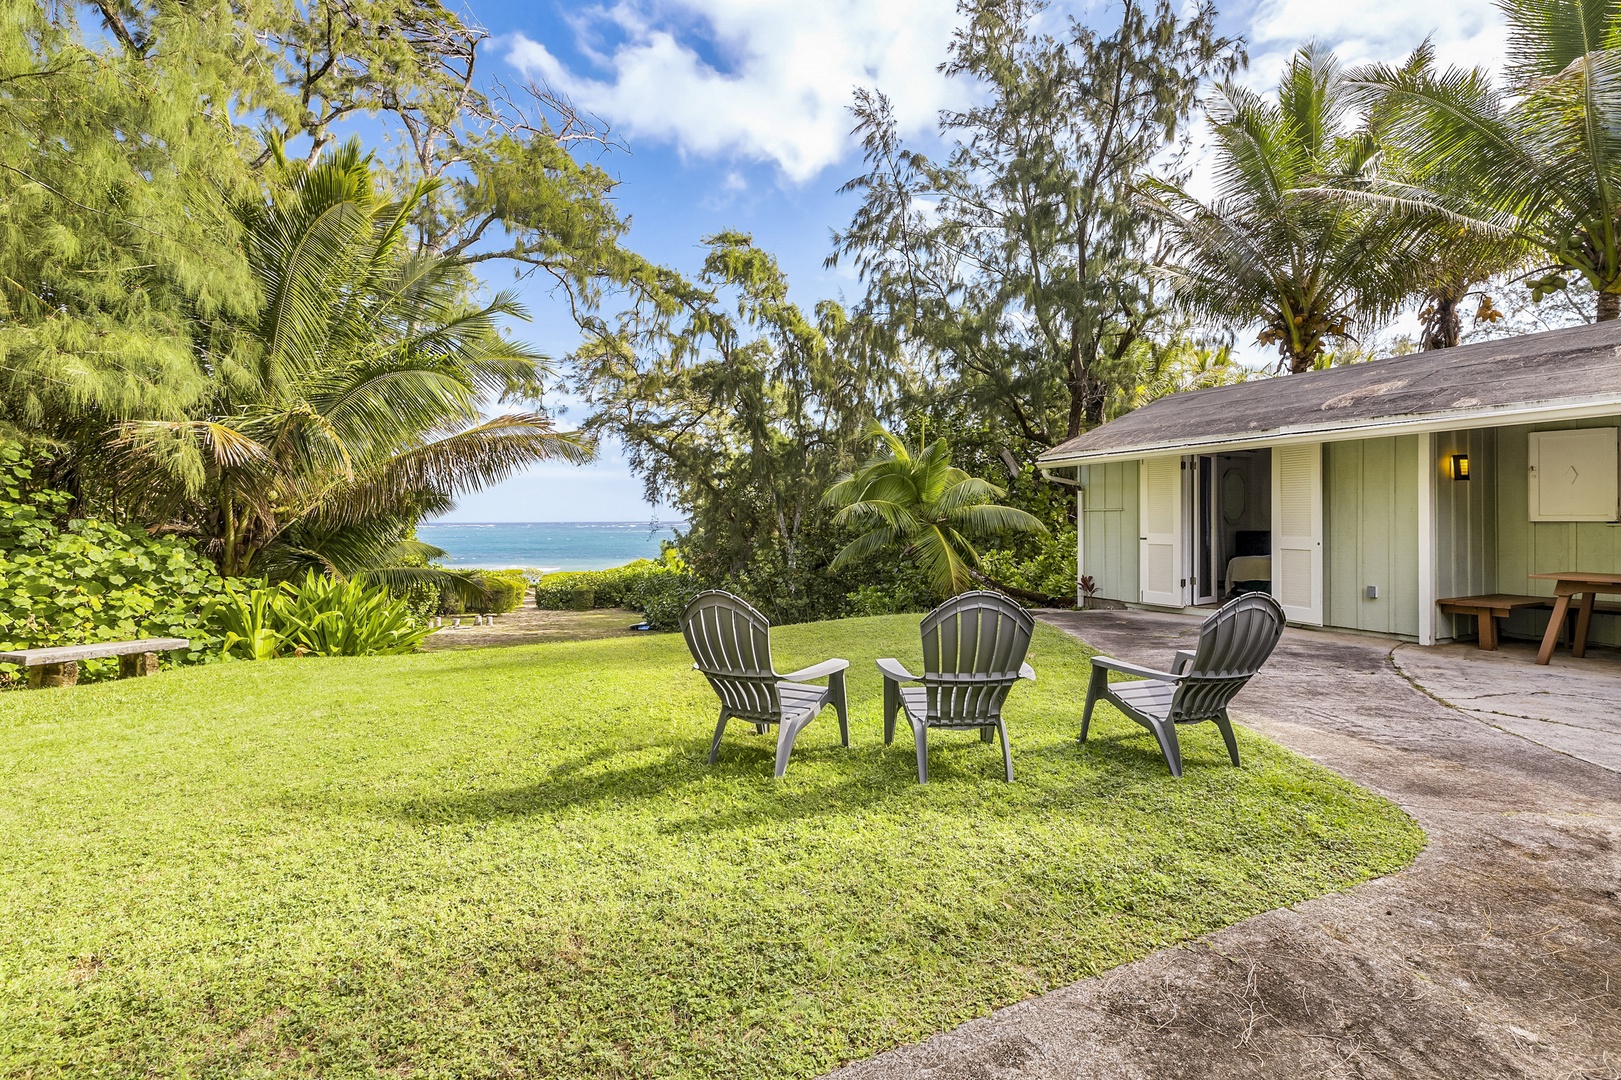 Kahuku Vacation Rentals, Hale Ula Ula - -Seating on the lawn with views of the ocean